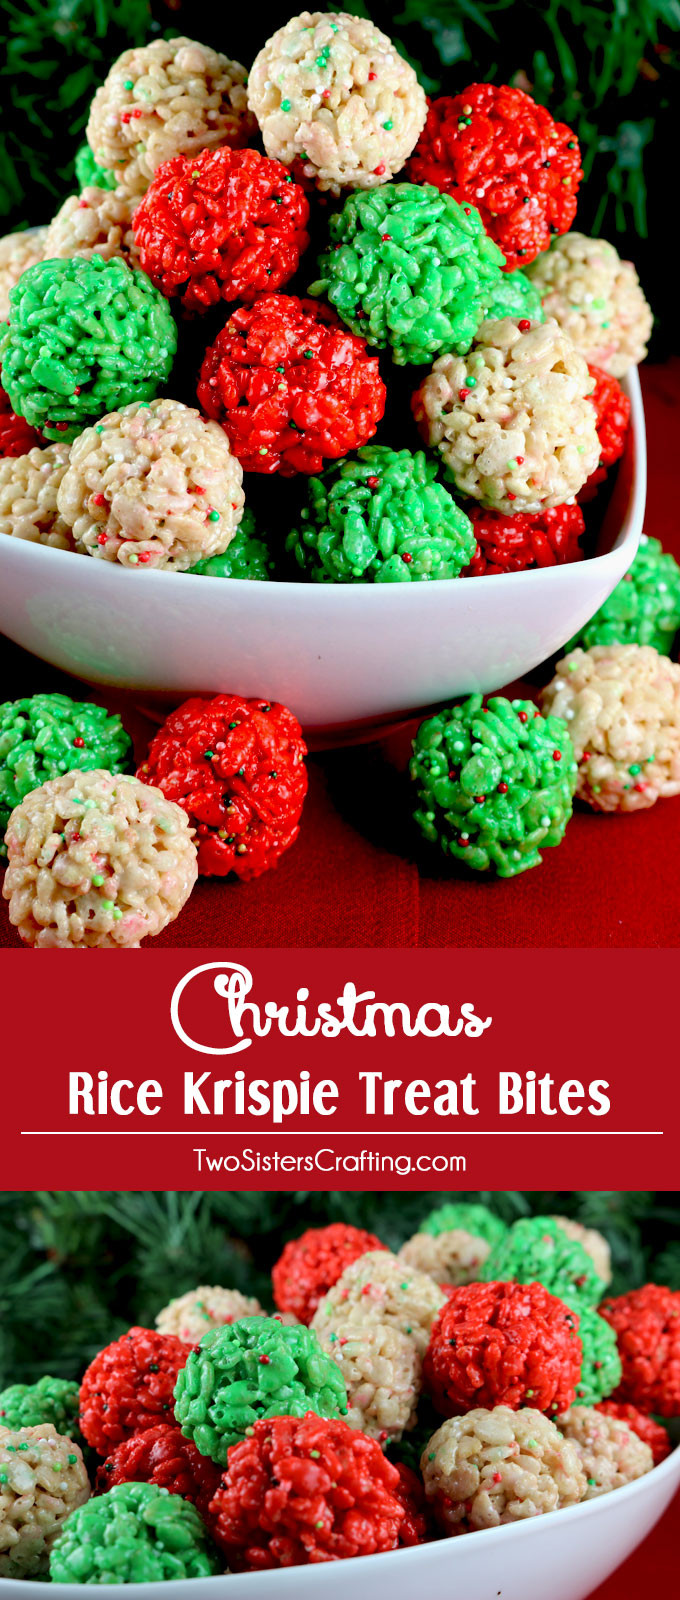 Holiday Party Snack Ideas
 Christmas Rice Krispie Treat Bites Two Sisters